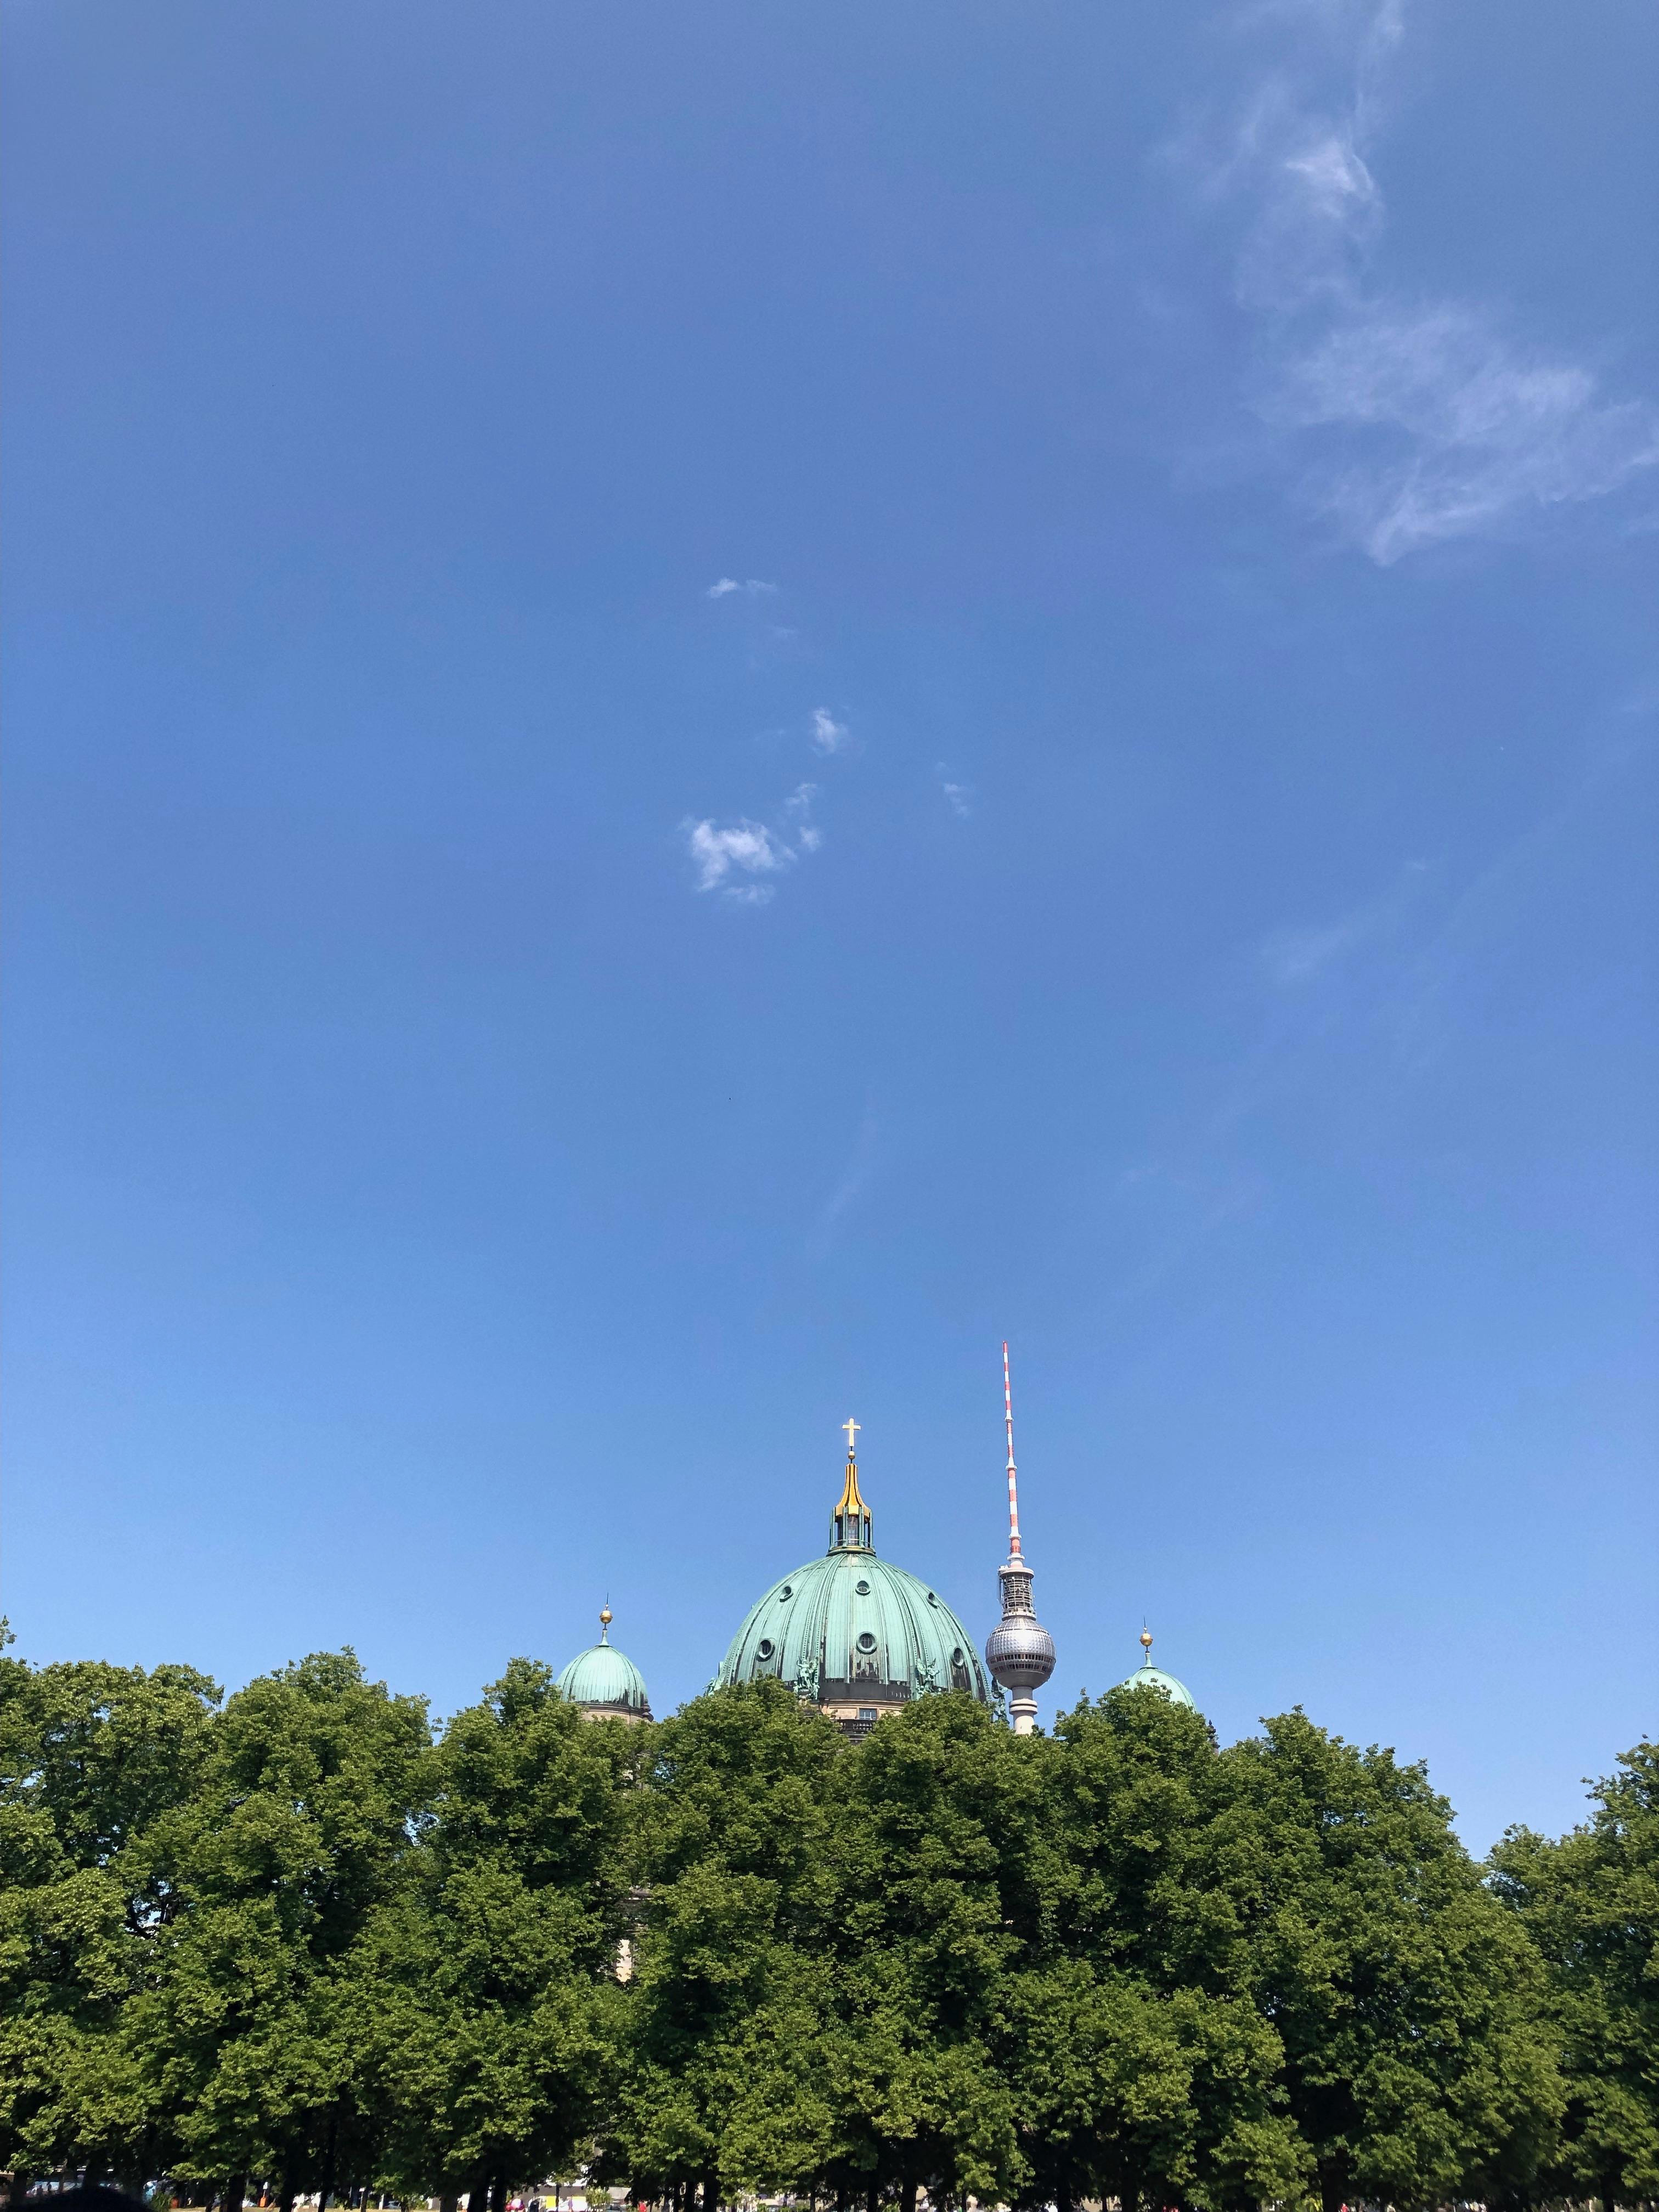 Berlin Cathedral located at Museum Island. Cathedral is blanketed by a row of trees. Further in the distance is the Fernsehturm (Television Tower) located in Alexandreplatz